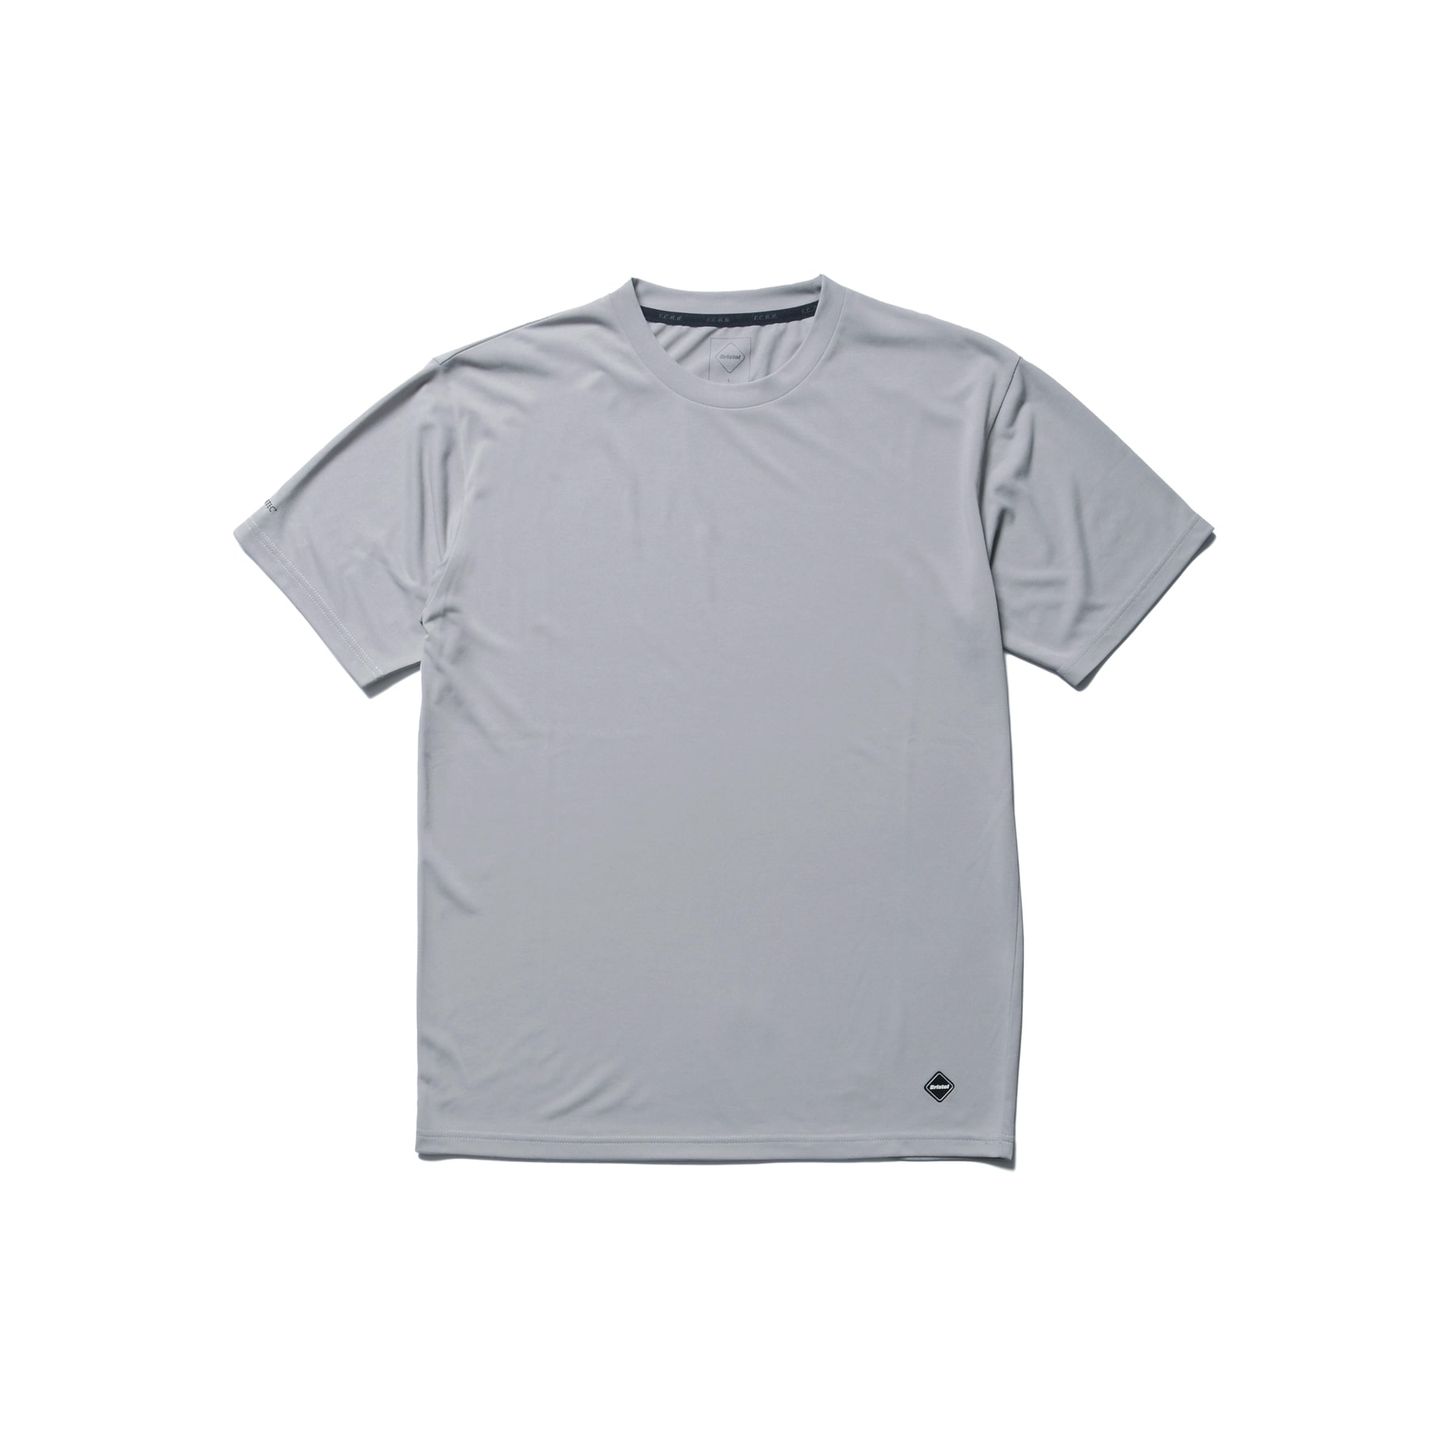 FCRB POLARTEC POWER DRY 3PACK TEE (FCRB232047) / 3 COLOR